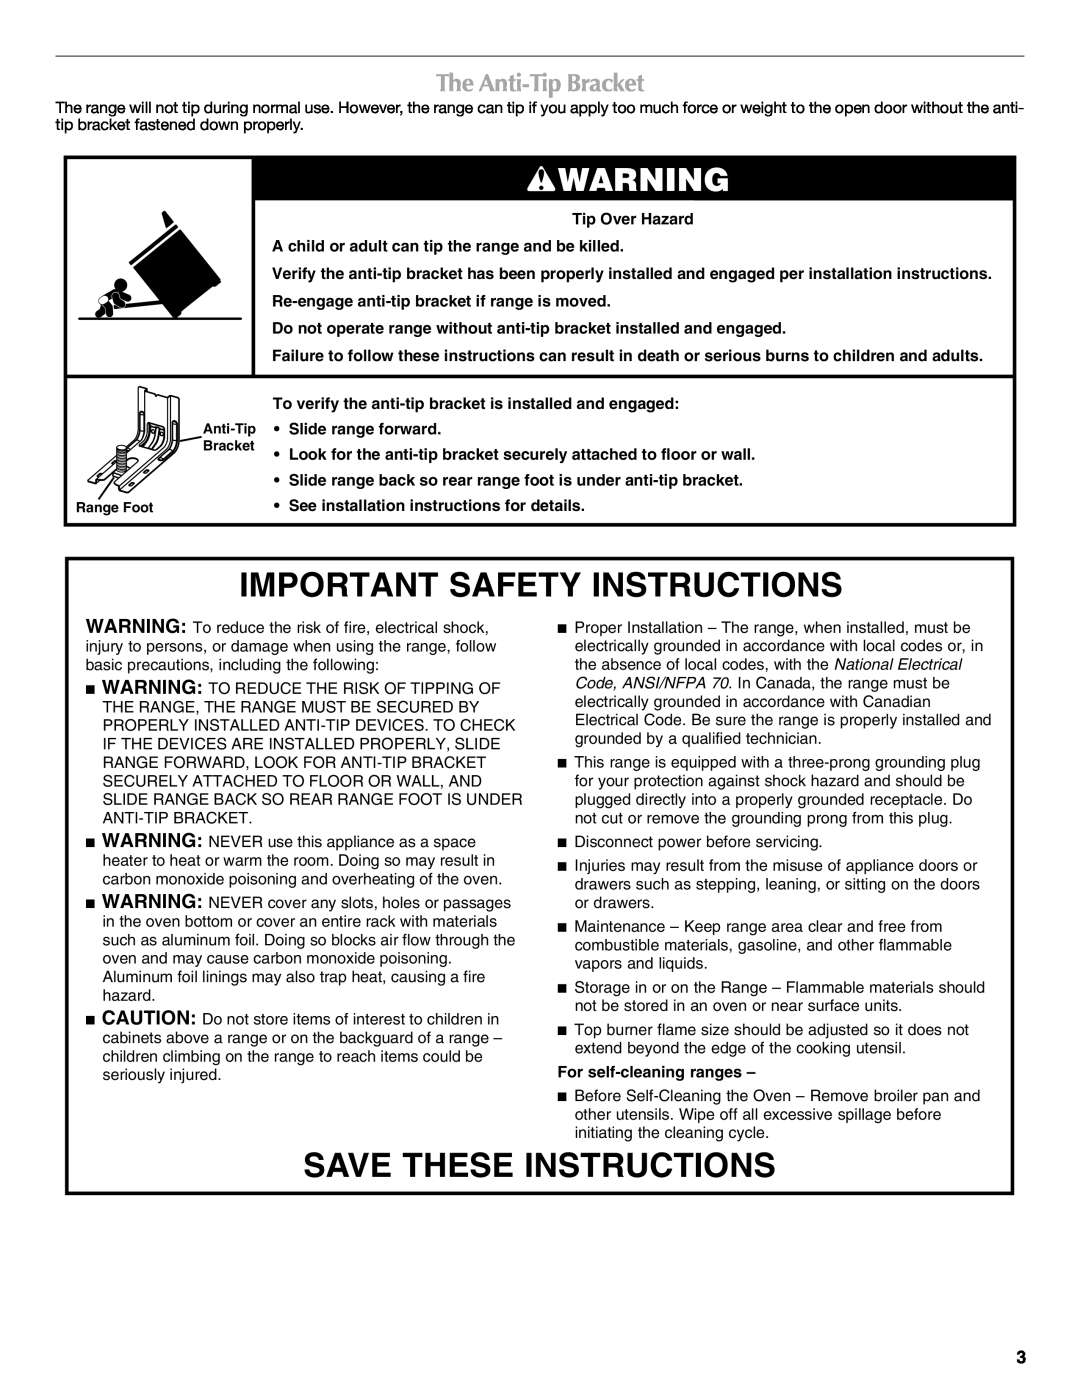 Maytag W10399029B warranty The Anti-TipBracket, Important Safety Instructions, Save These Instructions 